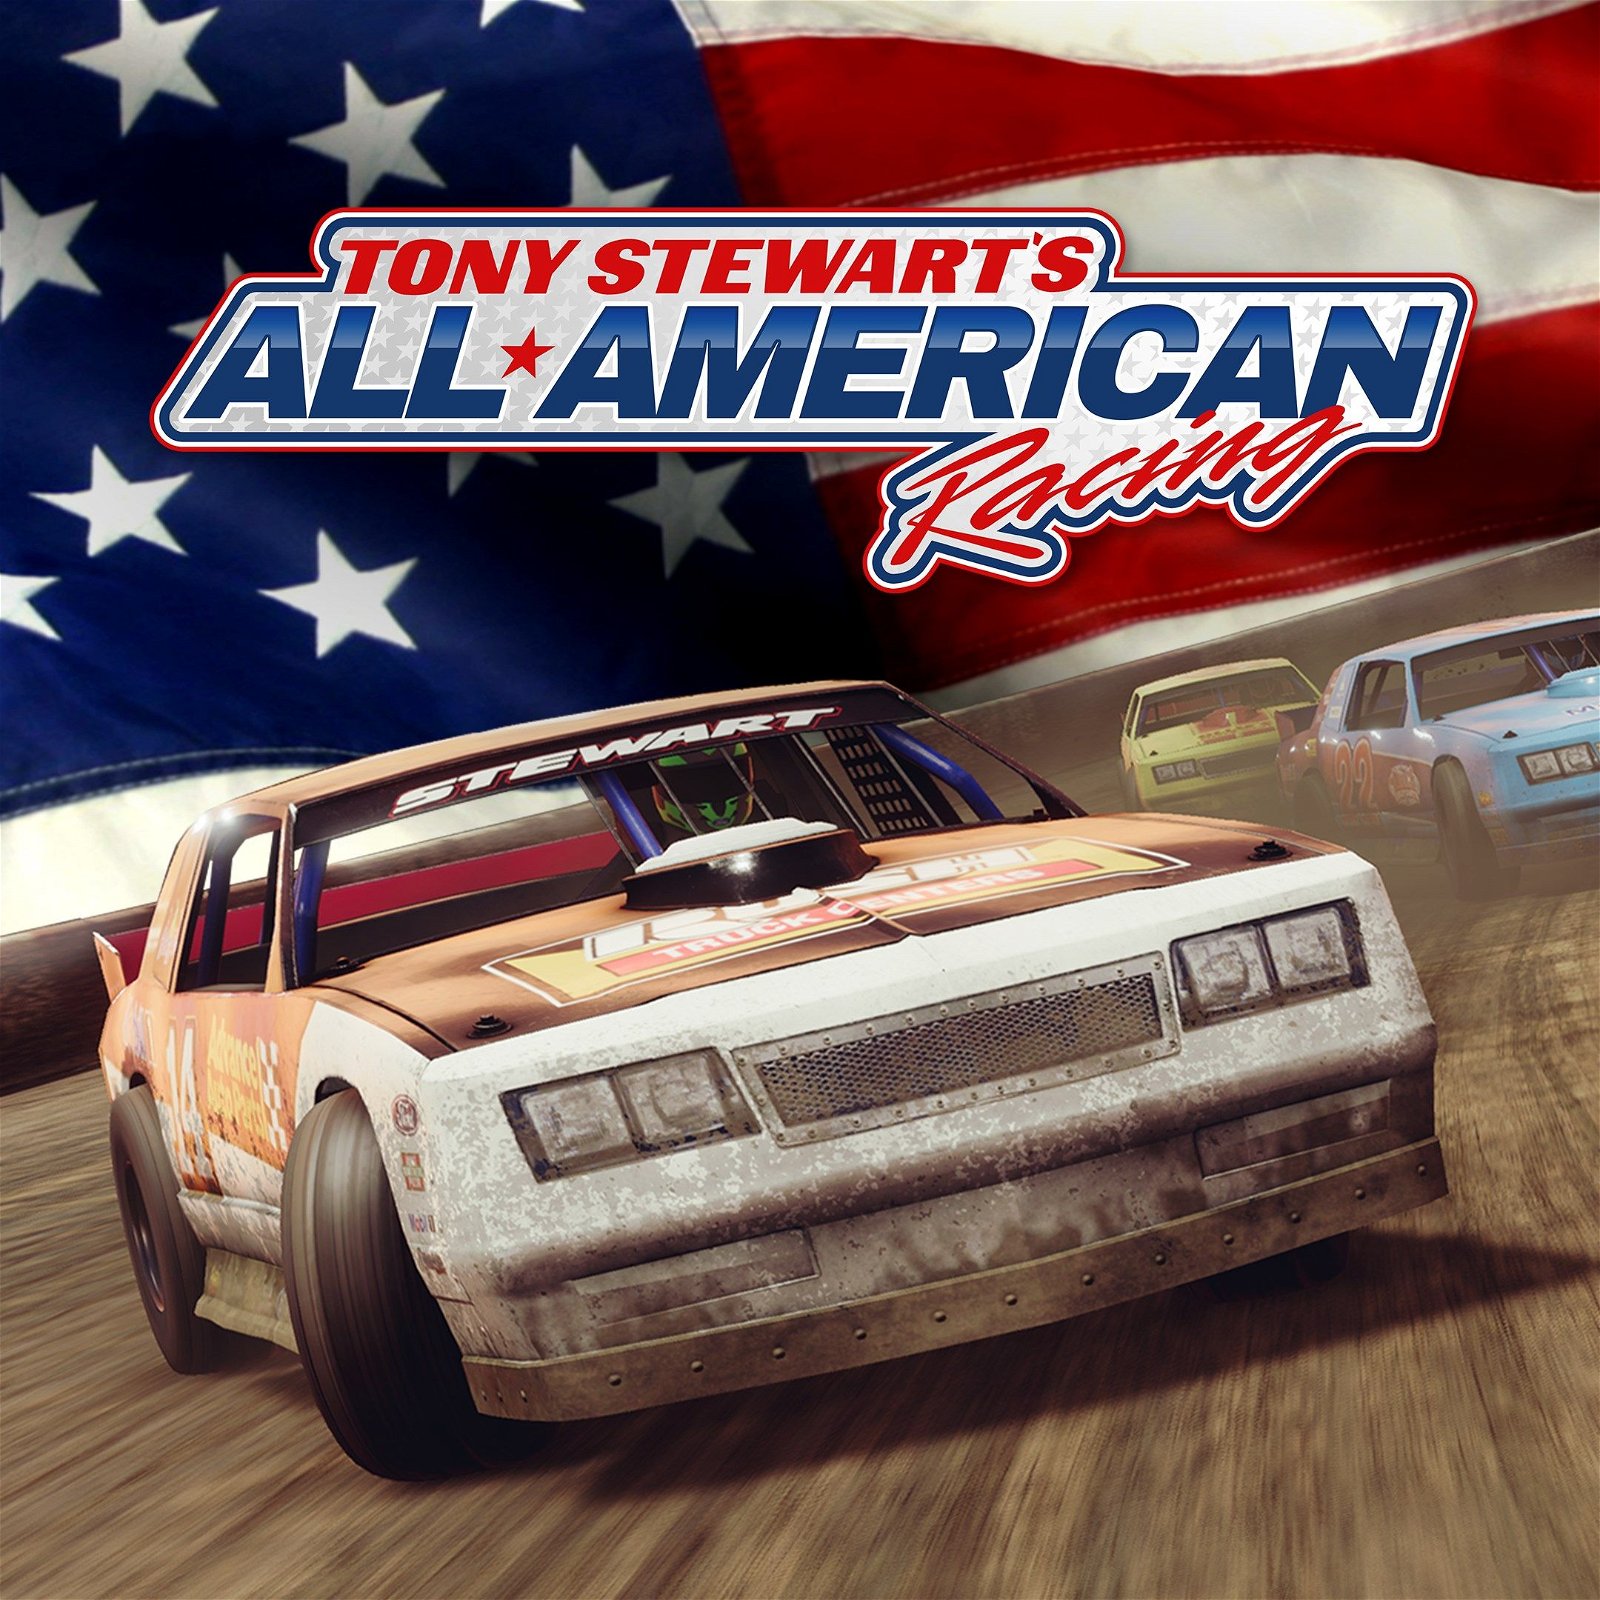 Image of Tony Stewart's All-American Racing